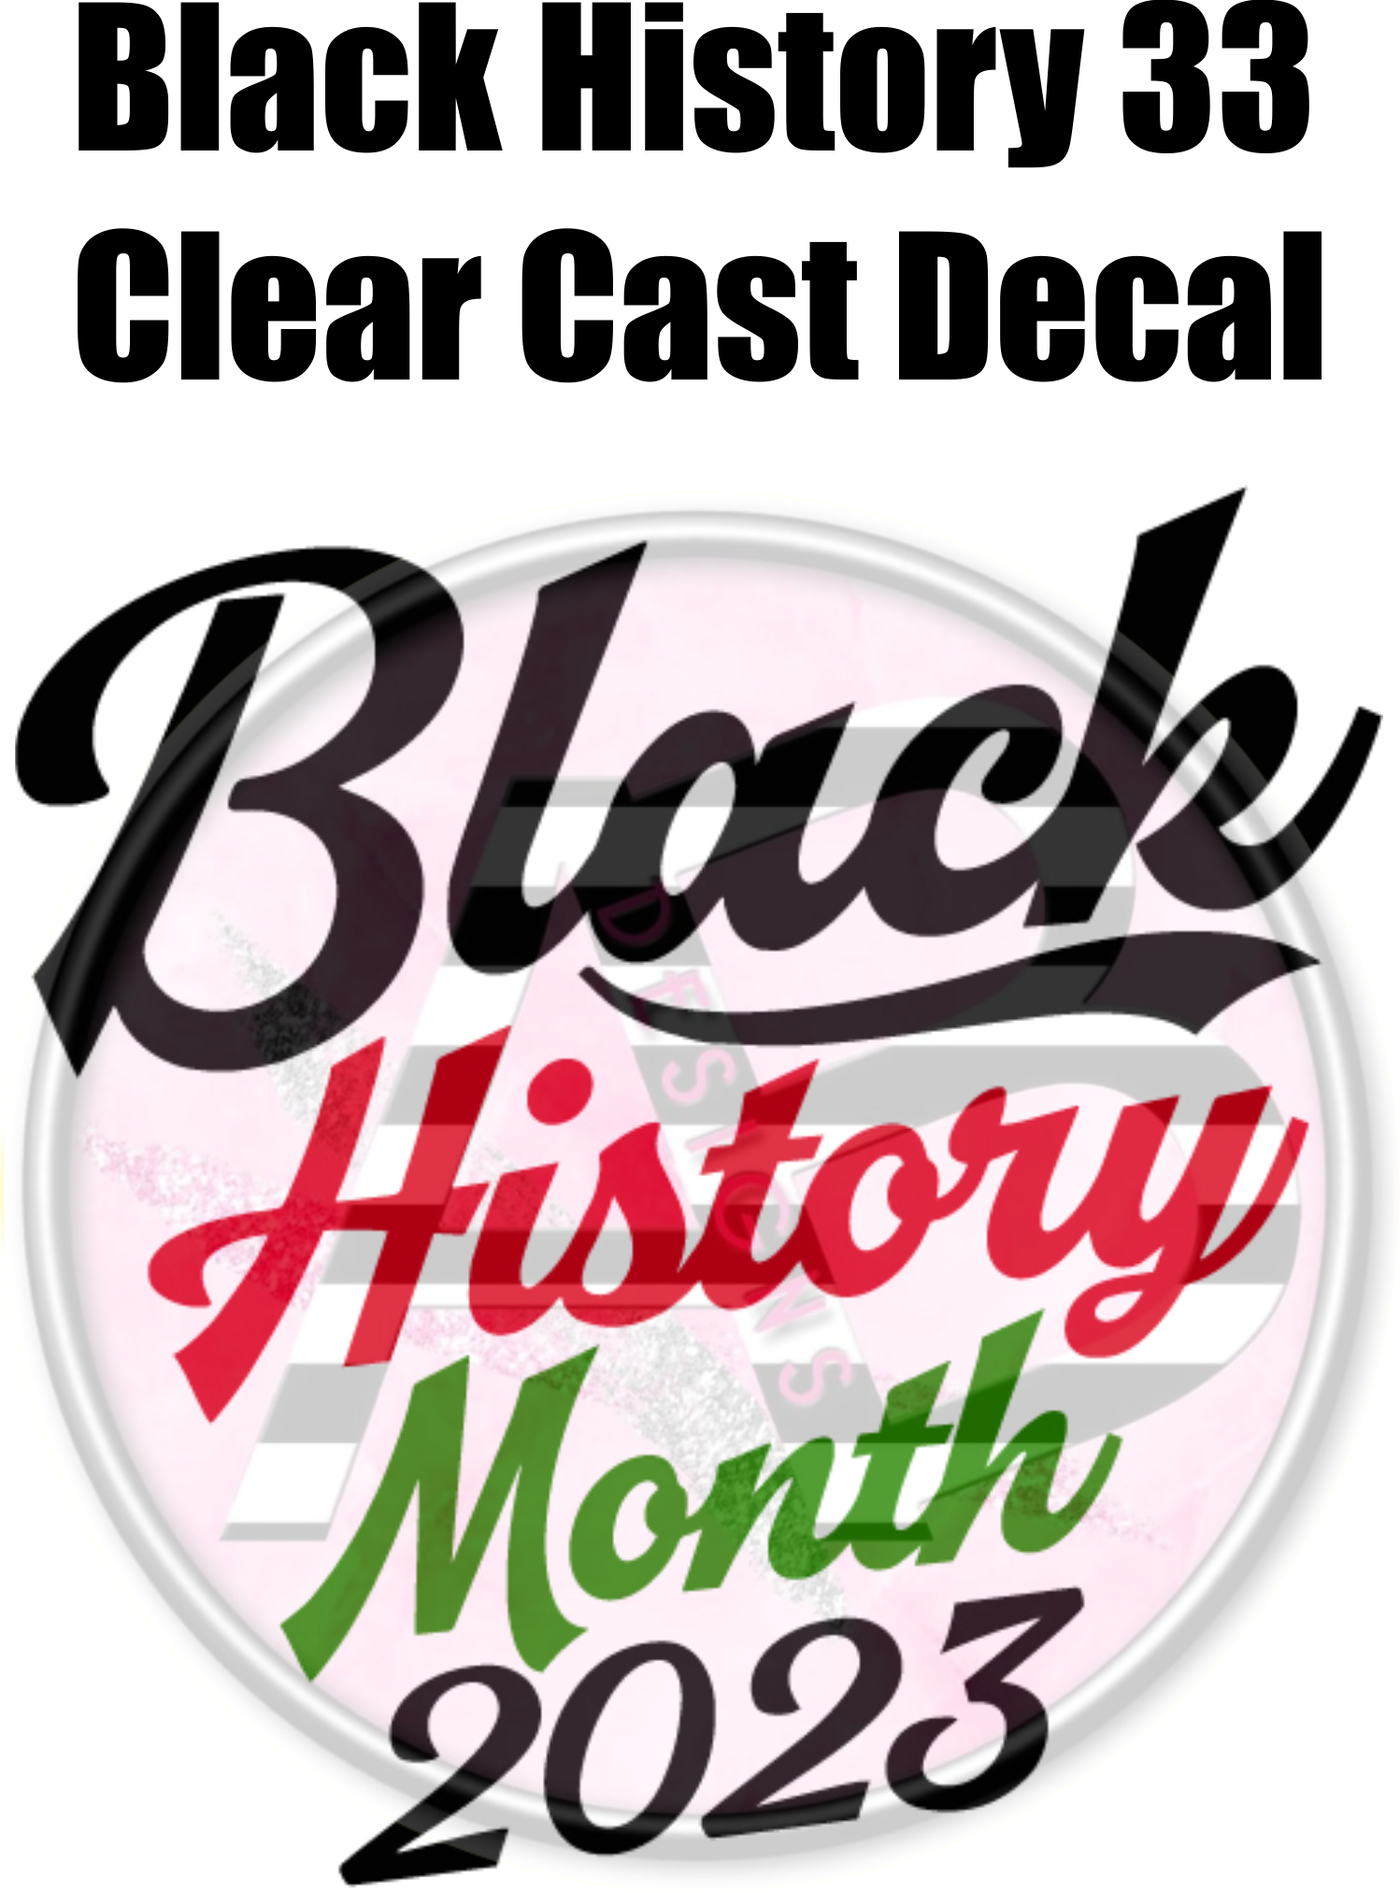 Black History 33 - Clear Cast Decal